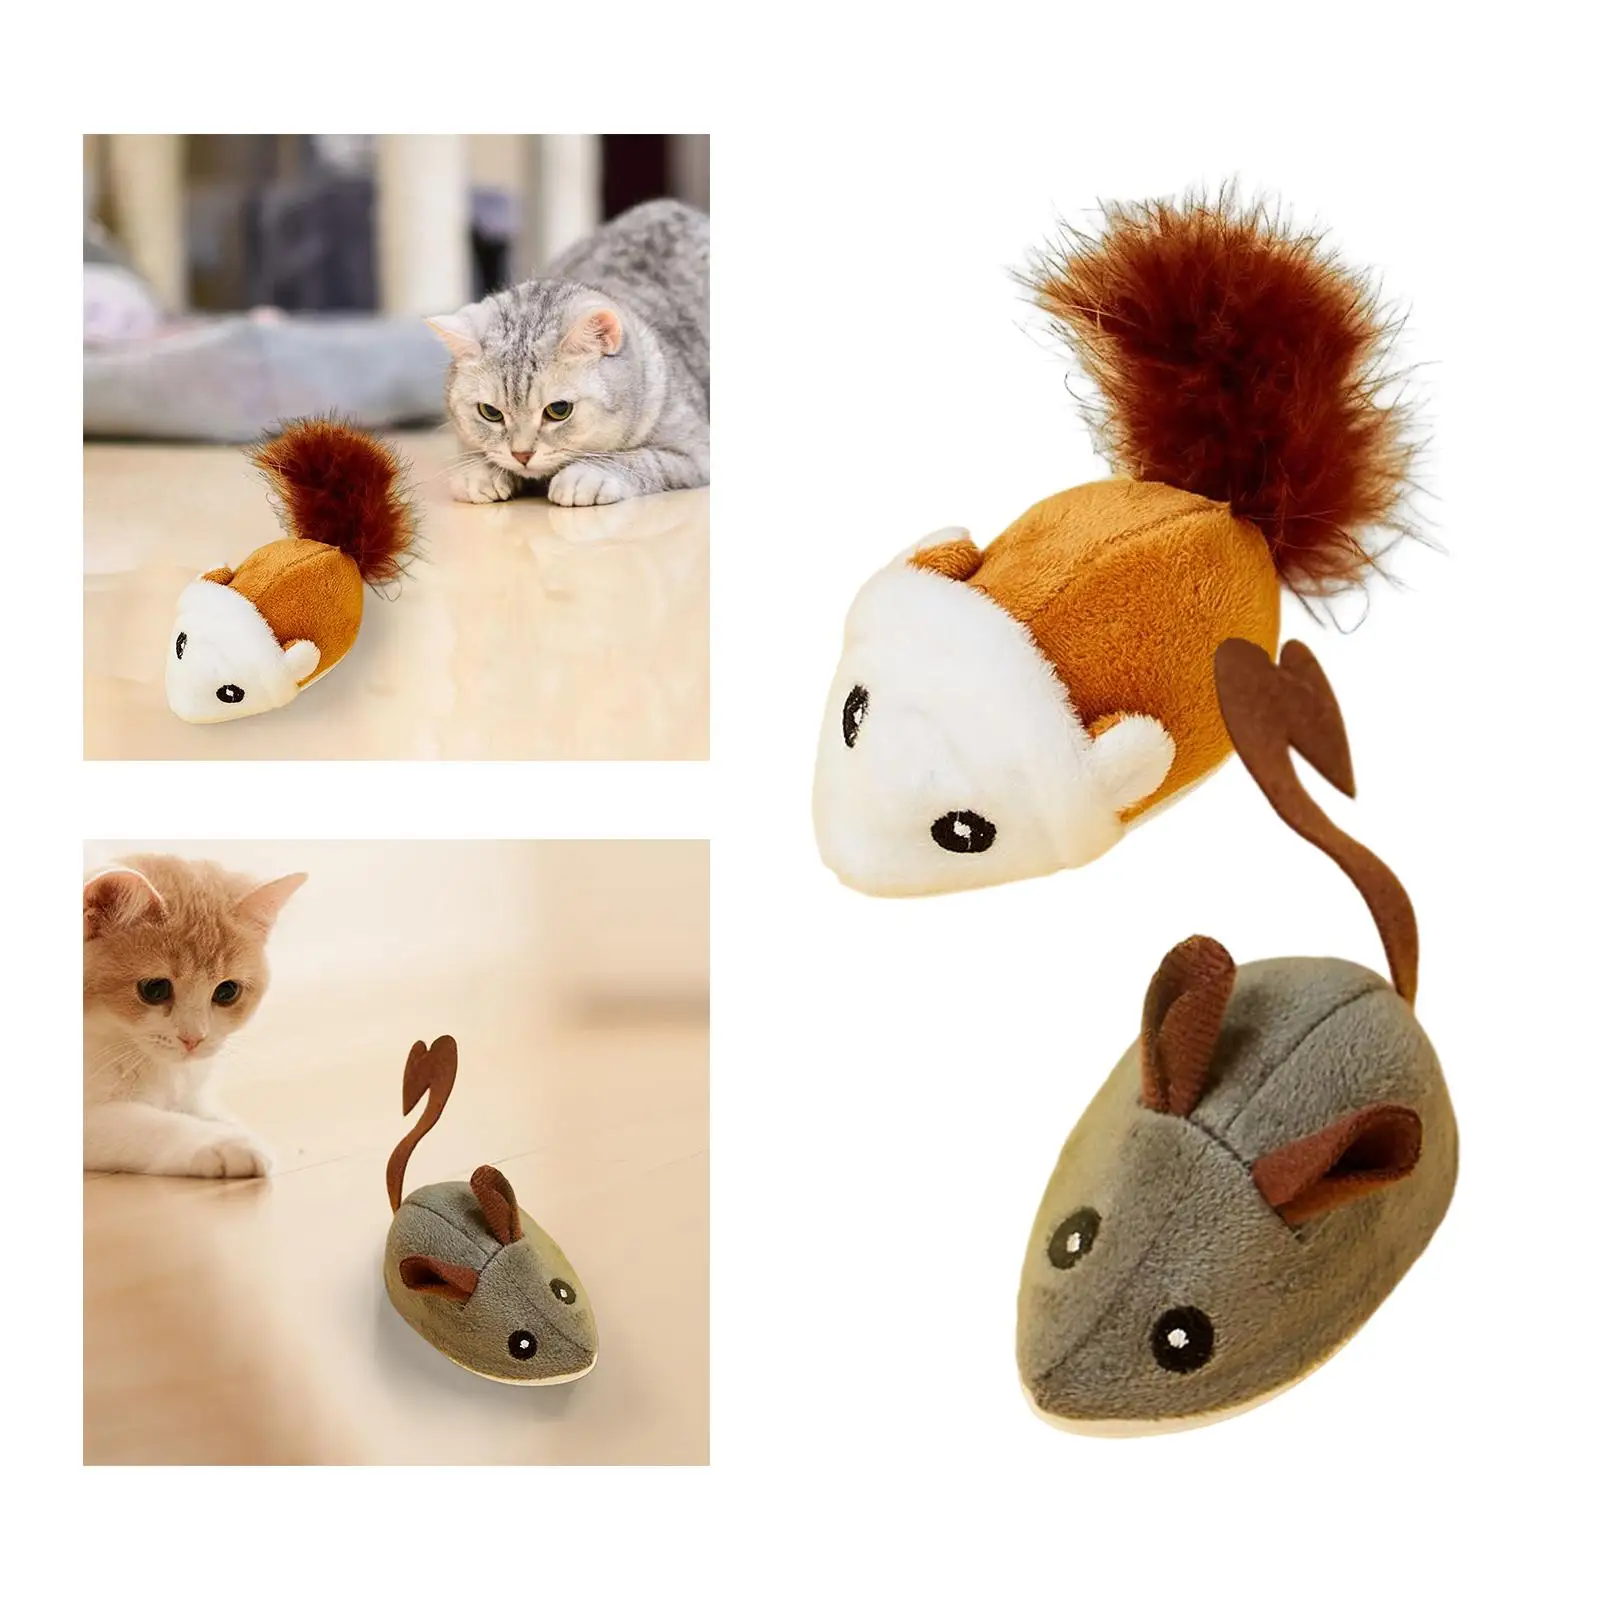 Simulation Toys Vivid Interactive Soft Portable Electric Moving Furry Plush Cat Toy for Playing Training Game Exercise Indoor